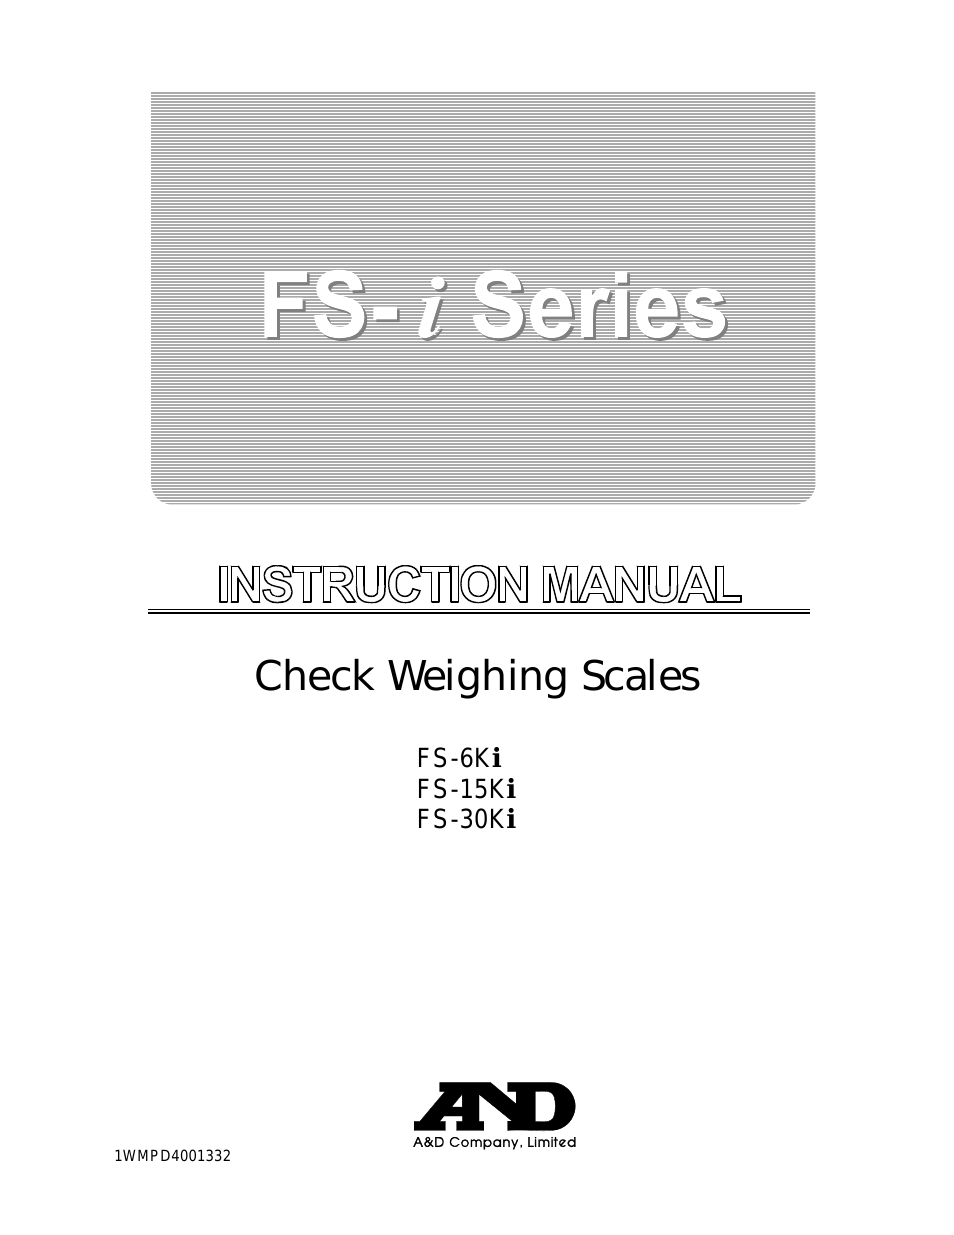 Check Weighing Scales FS-30Ki (Page 1)